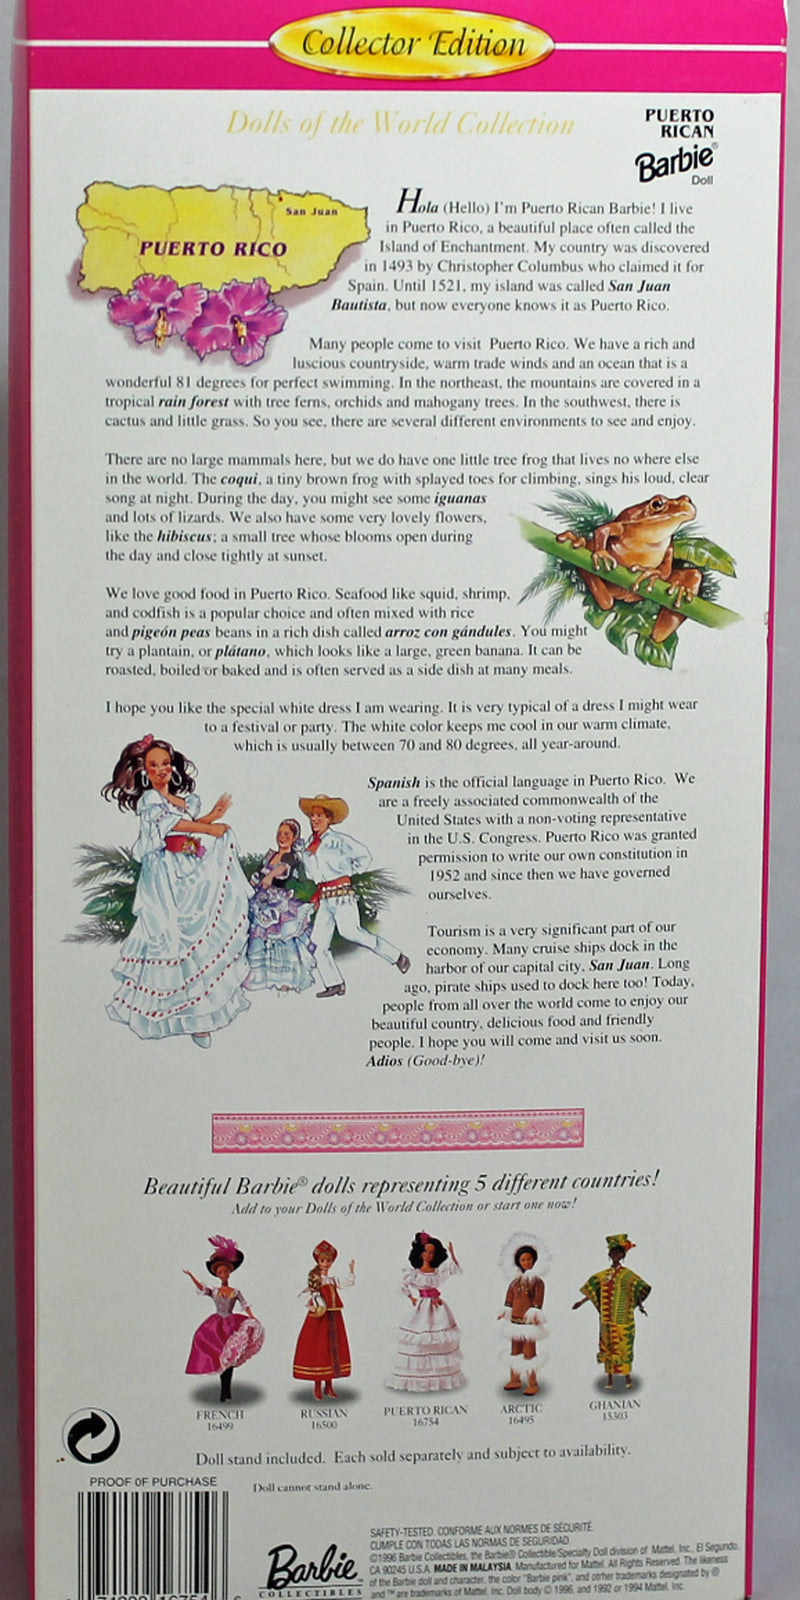 1996 Puerto Rican Barbie (16754) - Dolls of the World